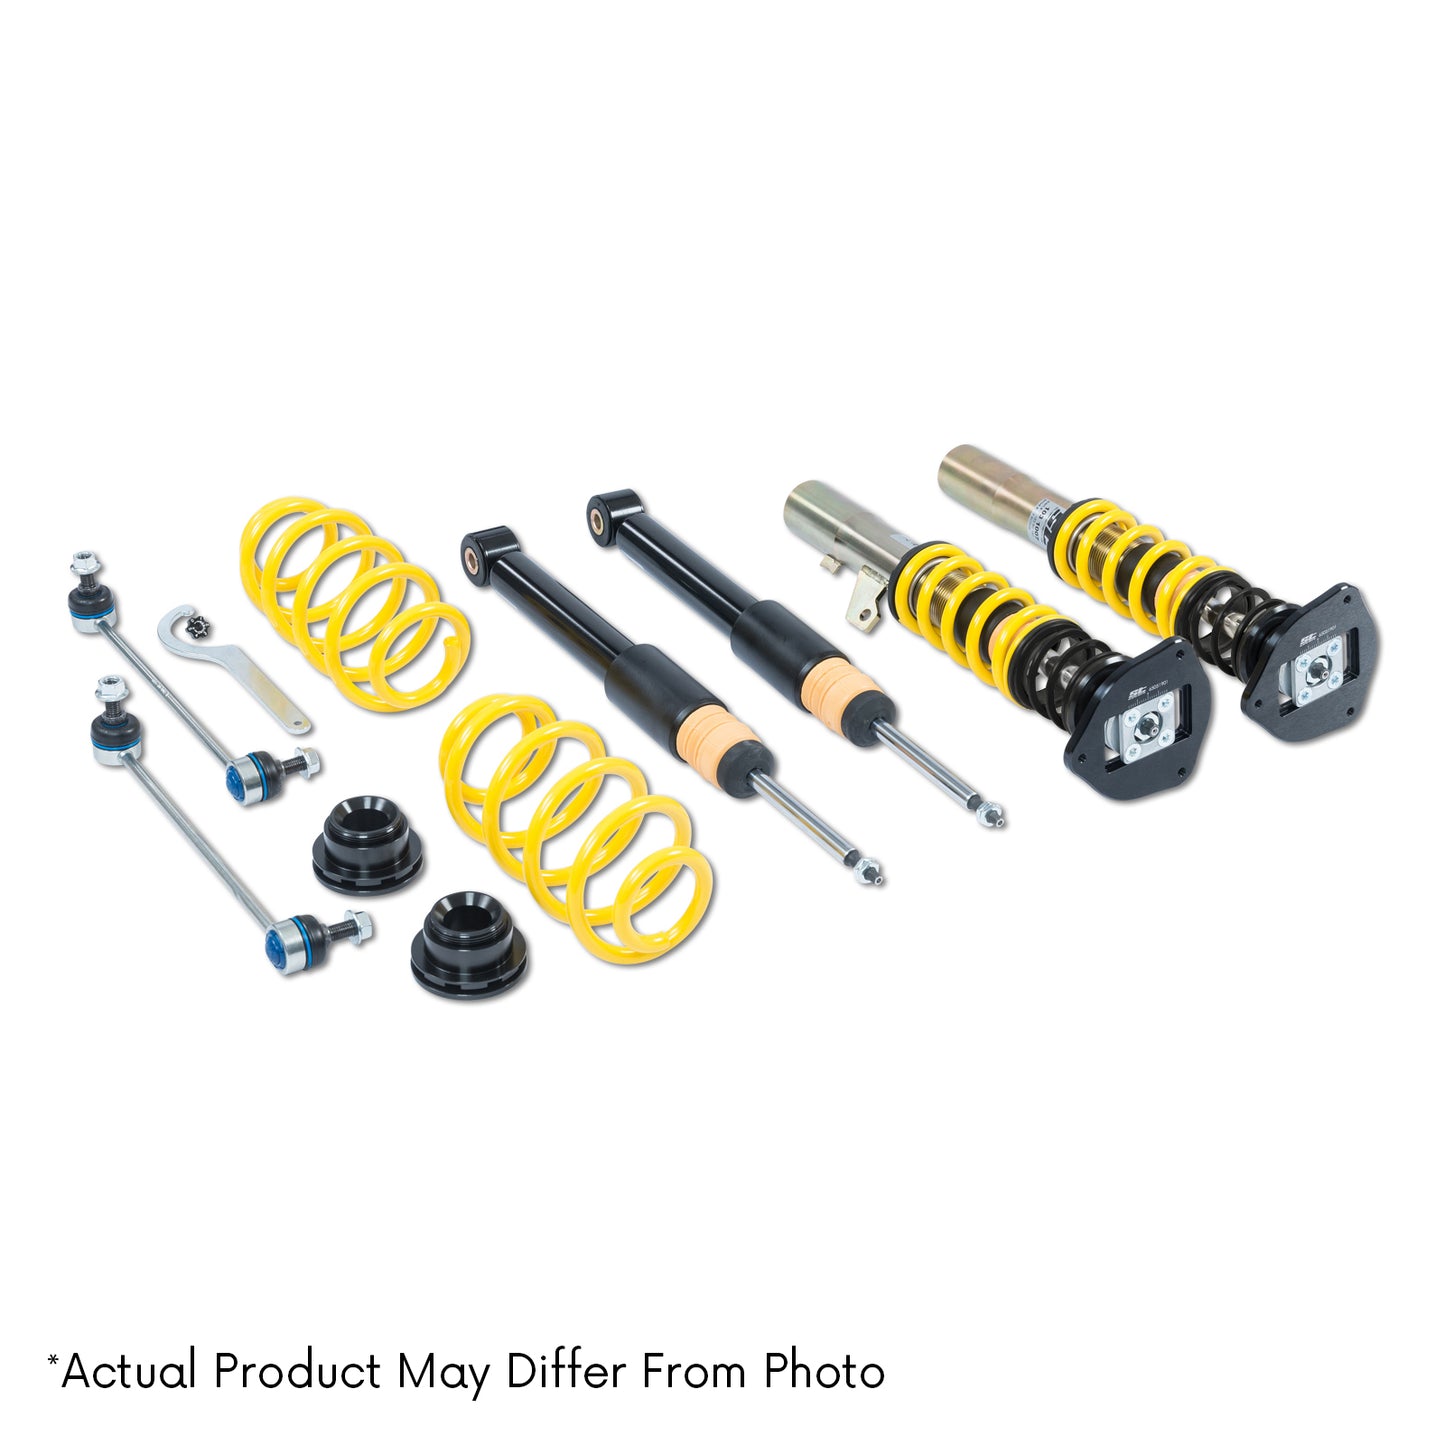 ST Suspensions 18220867 ST XTA Coilover Kit - BMW E9X M3 without Electronic Damper Control